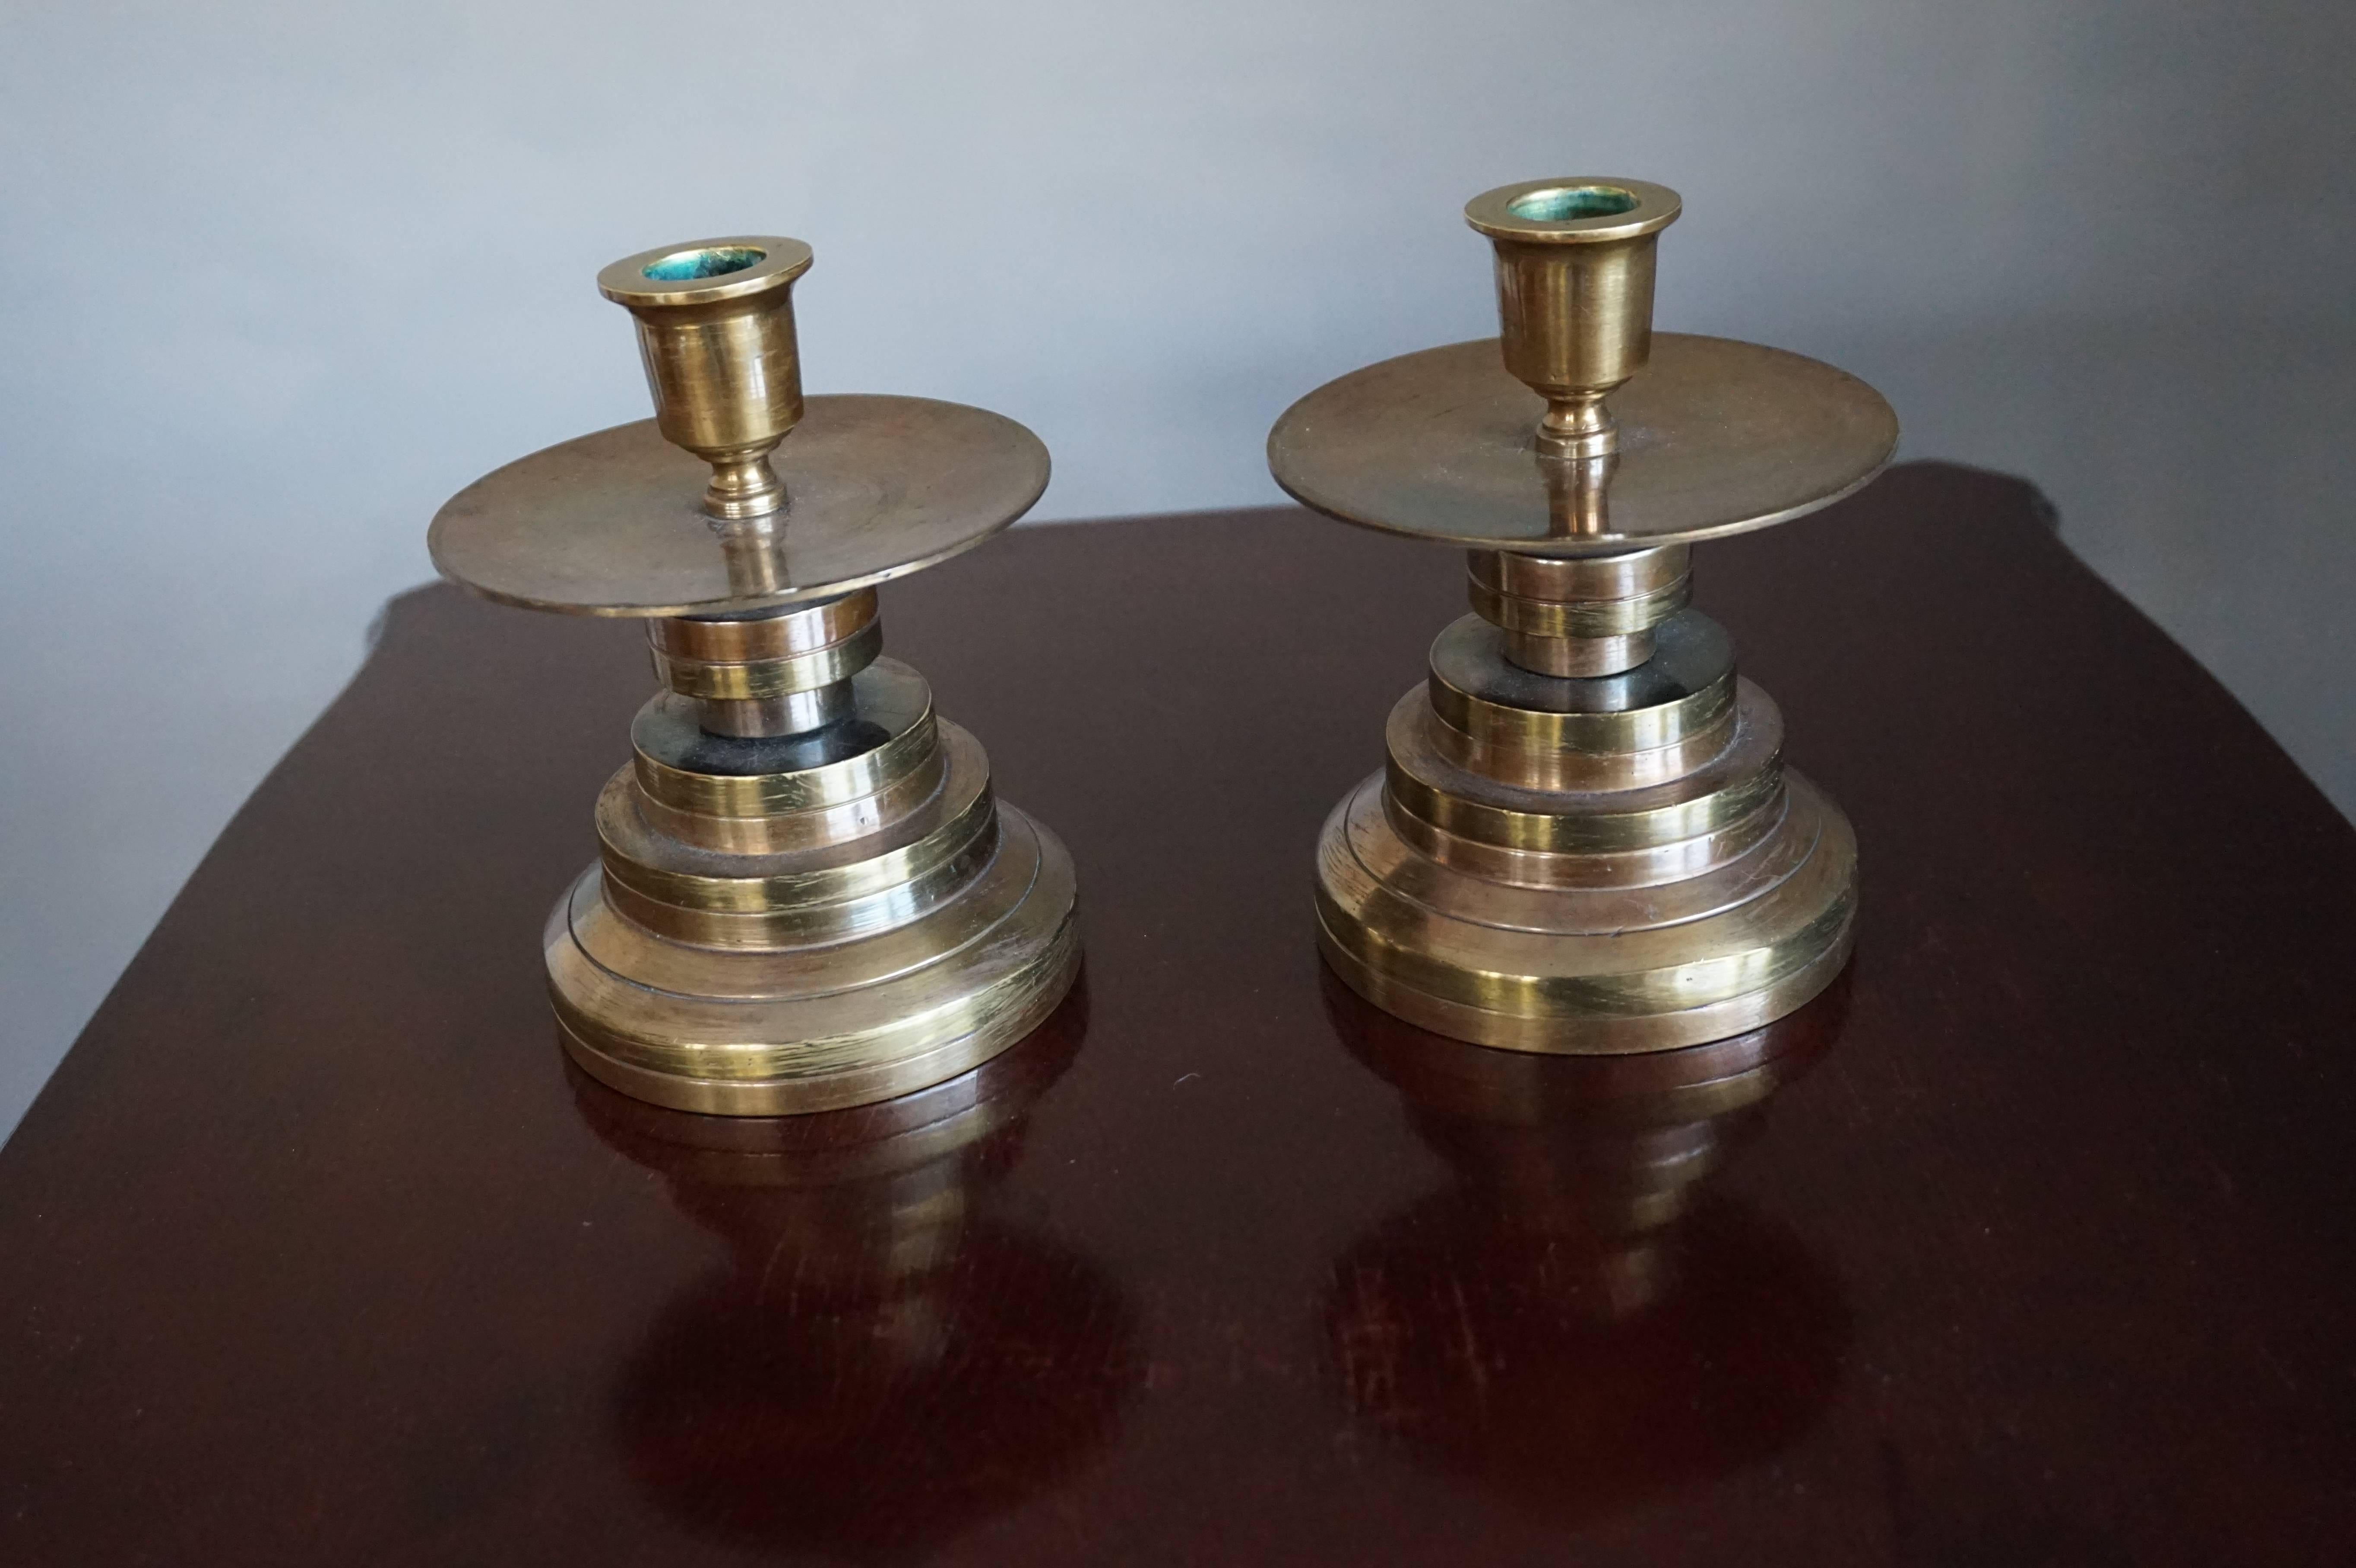 Beautiful and very stylish pair of timeless candle sticks.

From up close these stunning and heavy, brass candle sticks show scratches on the surface, but from a yard away no one will notice. Their Art Deco style and their great look and feel will